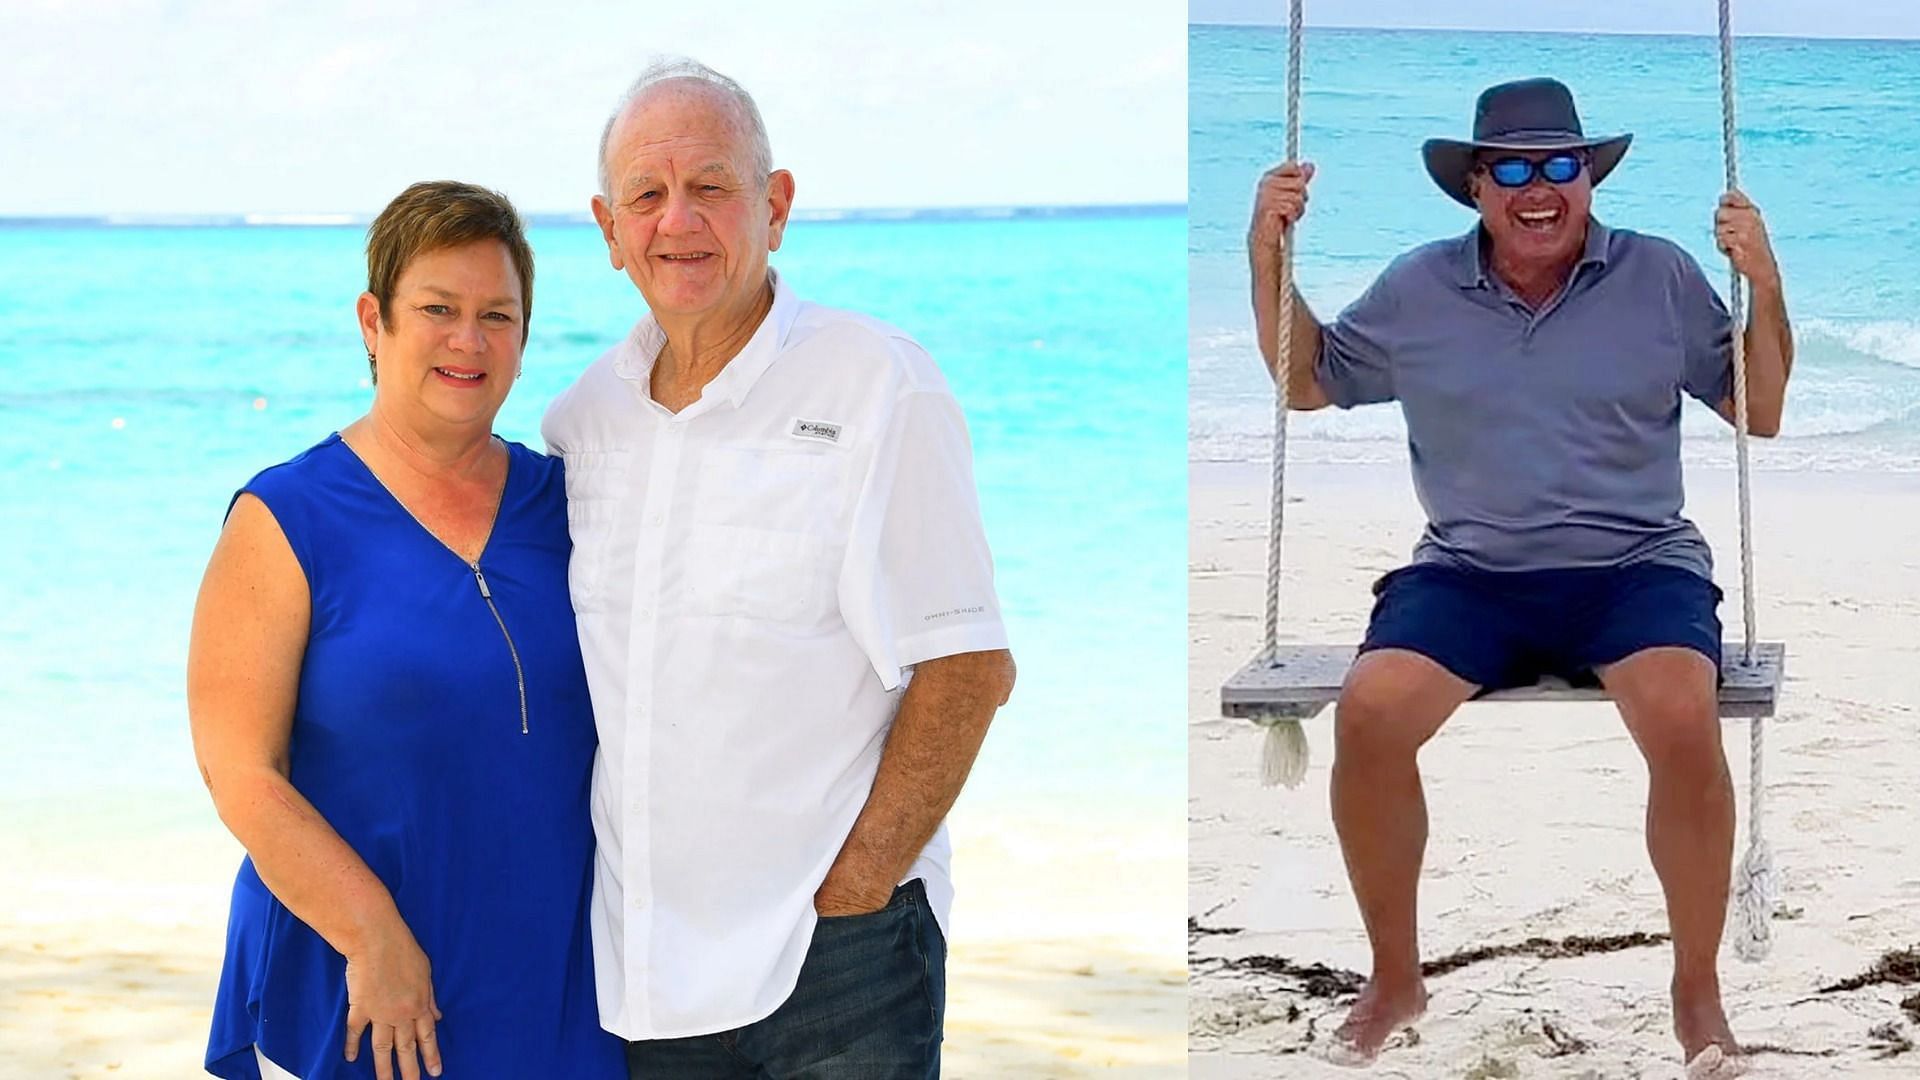 Carbon monoxide poisoning was ruled the cause of death of three Americans at the Bahamas Sandals resort (Images via Robbie Phillips/Facebook and Austin Chiarella)